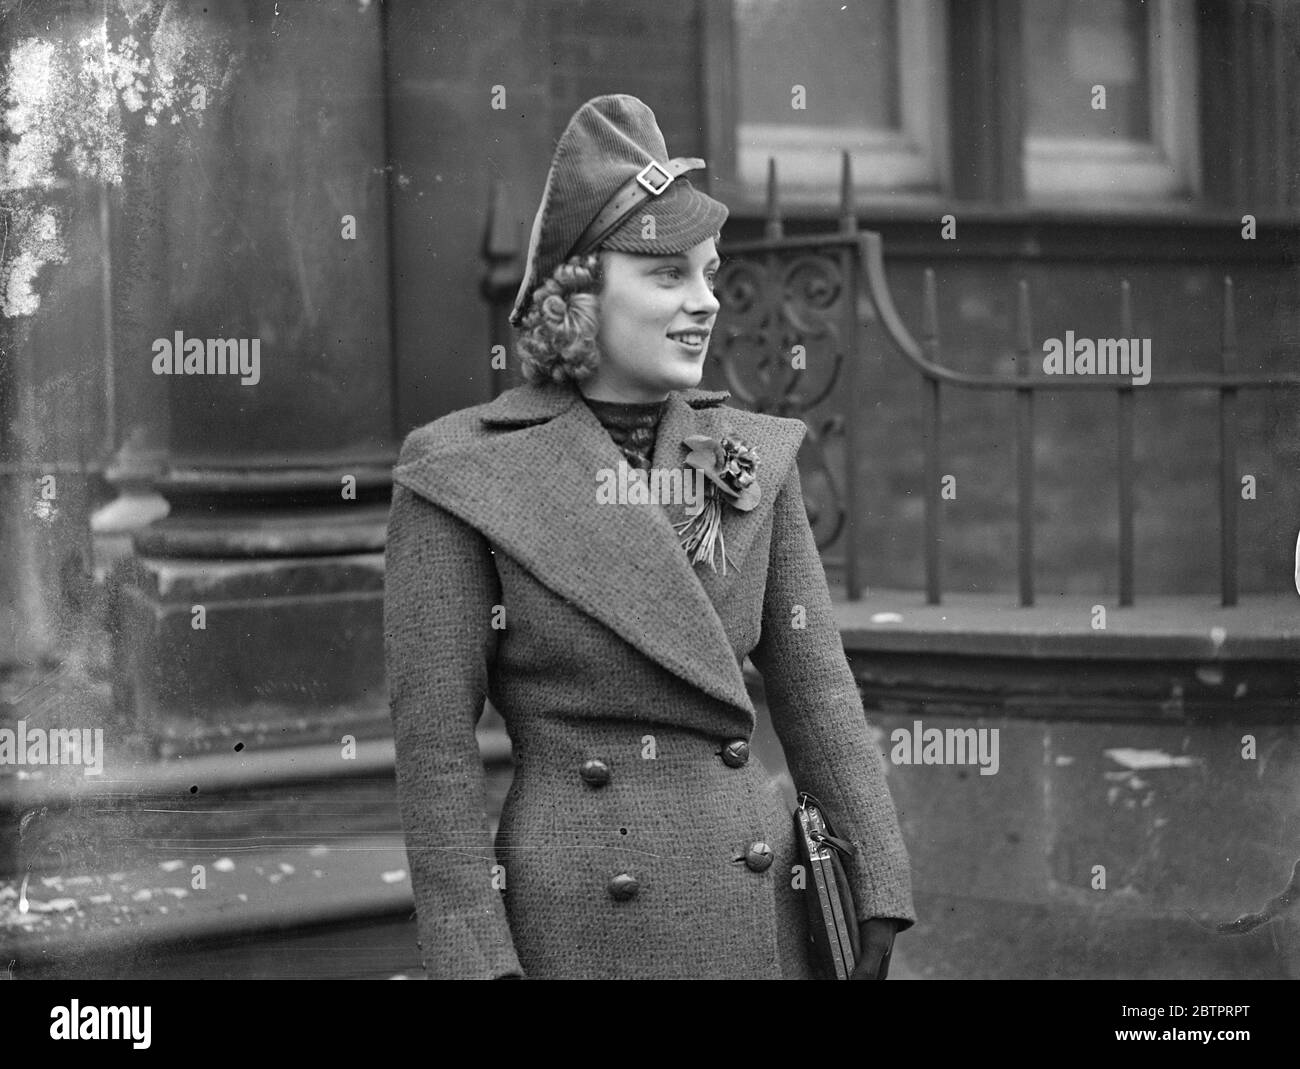 'Apache' touch at London wedding. A distinctive hat, that seams to have a touch of the 'Apache' style, worn by Miss Beatrice Watts at the wedding of Mr G Walker of Sudbury and Miss B Sherman at the Paddington Register office, London. 27 November 1937 Stock Photo